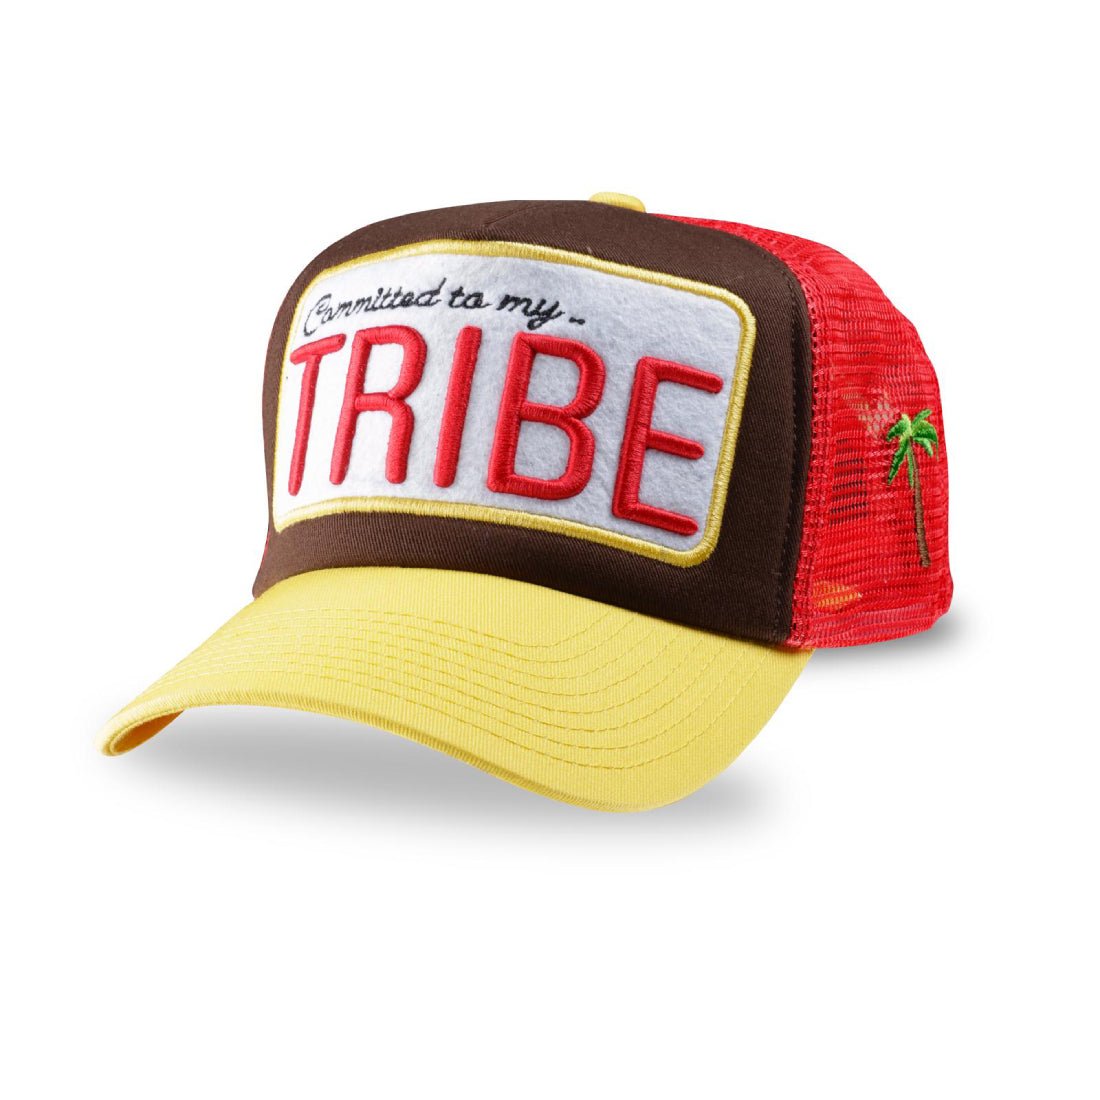 Tribe Adults Cap - Brown/Yellow/Red - قبعة - Store 974 | ستور ٩٧٤